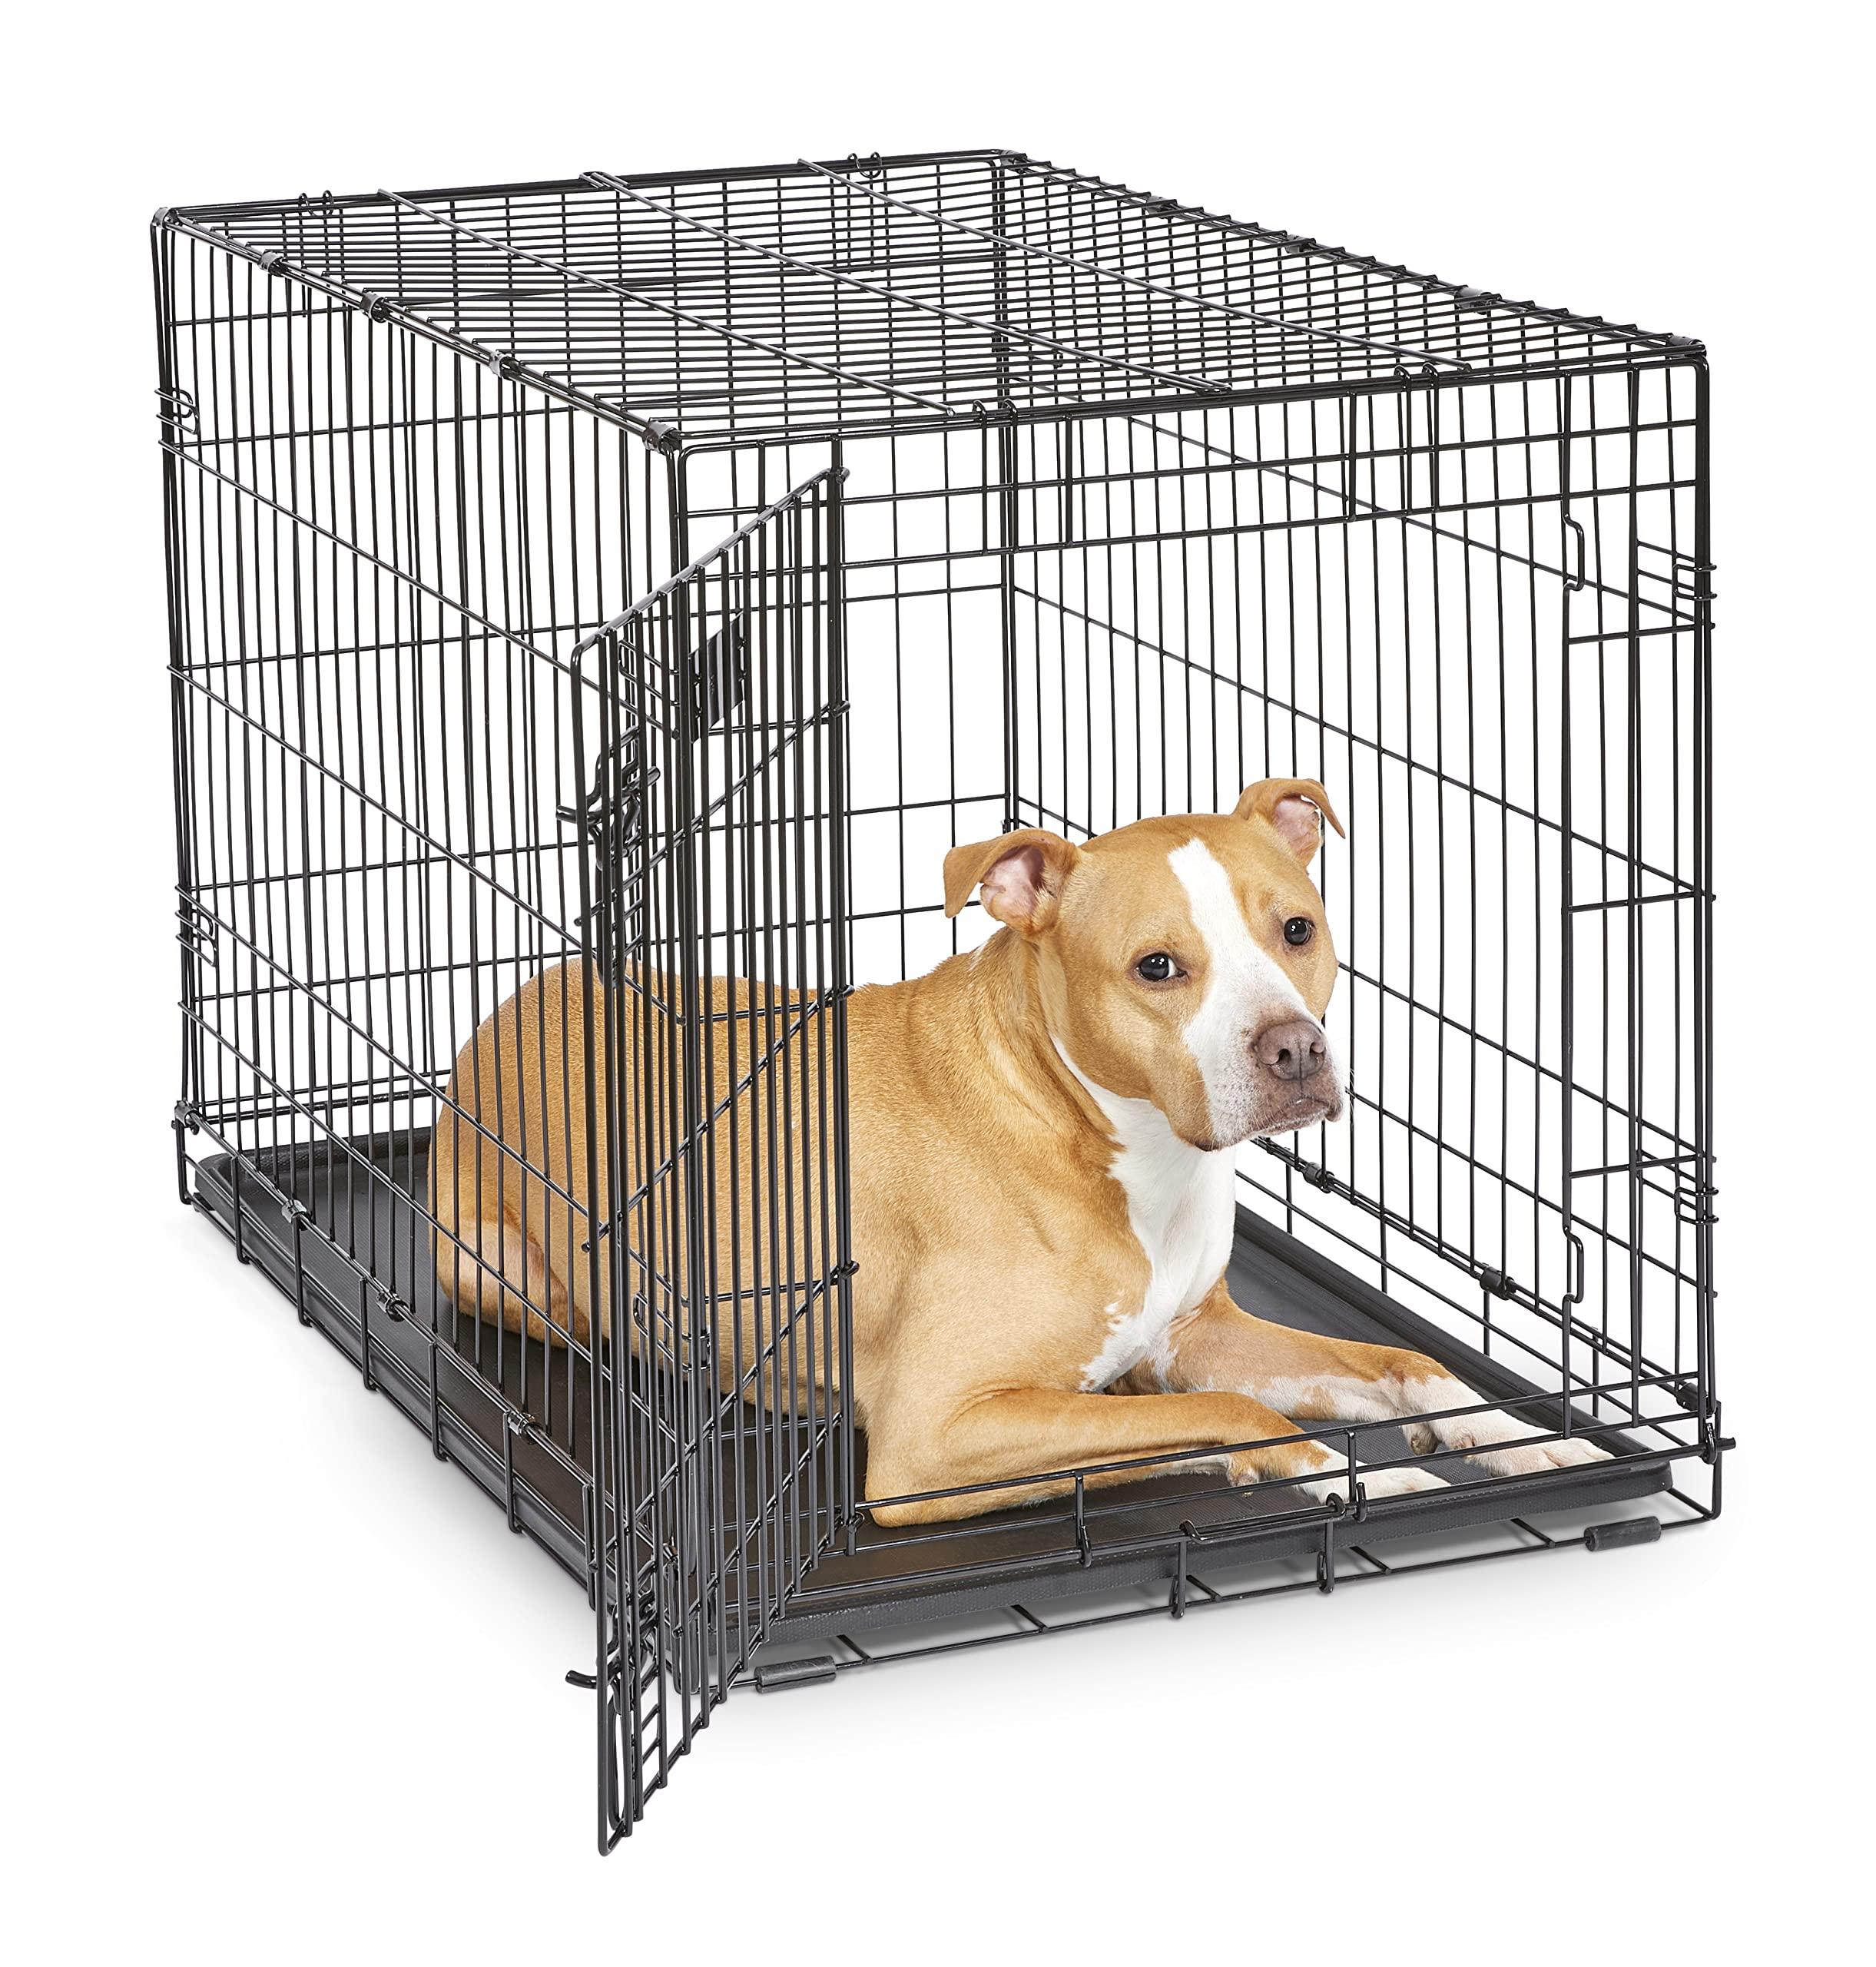 MidWest Homes for Pets Newly Enhanced Single & Double Door iCrate Dog Crate, Includes Leak-Proof Pan, Floor Protecting Feet , Divider Panel & New Patented Features